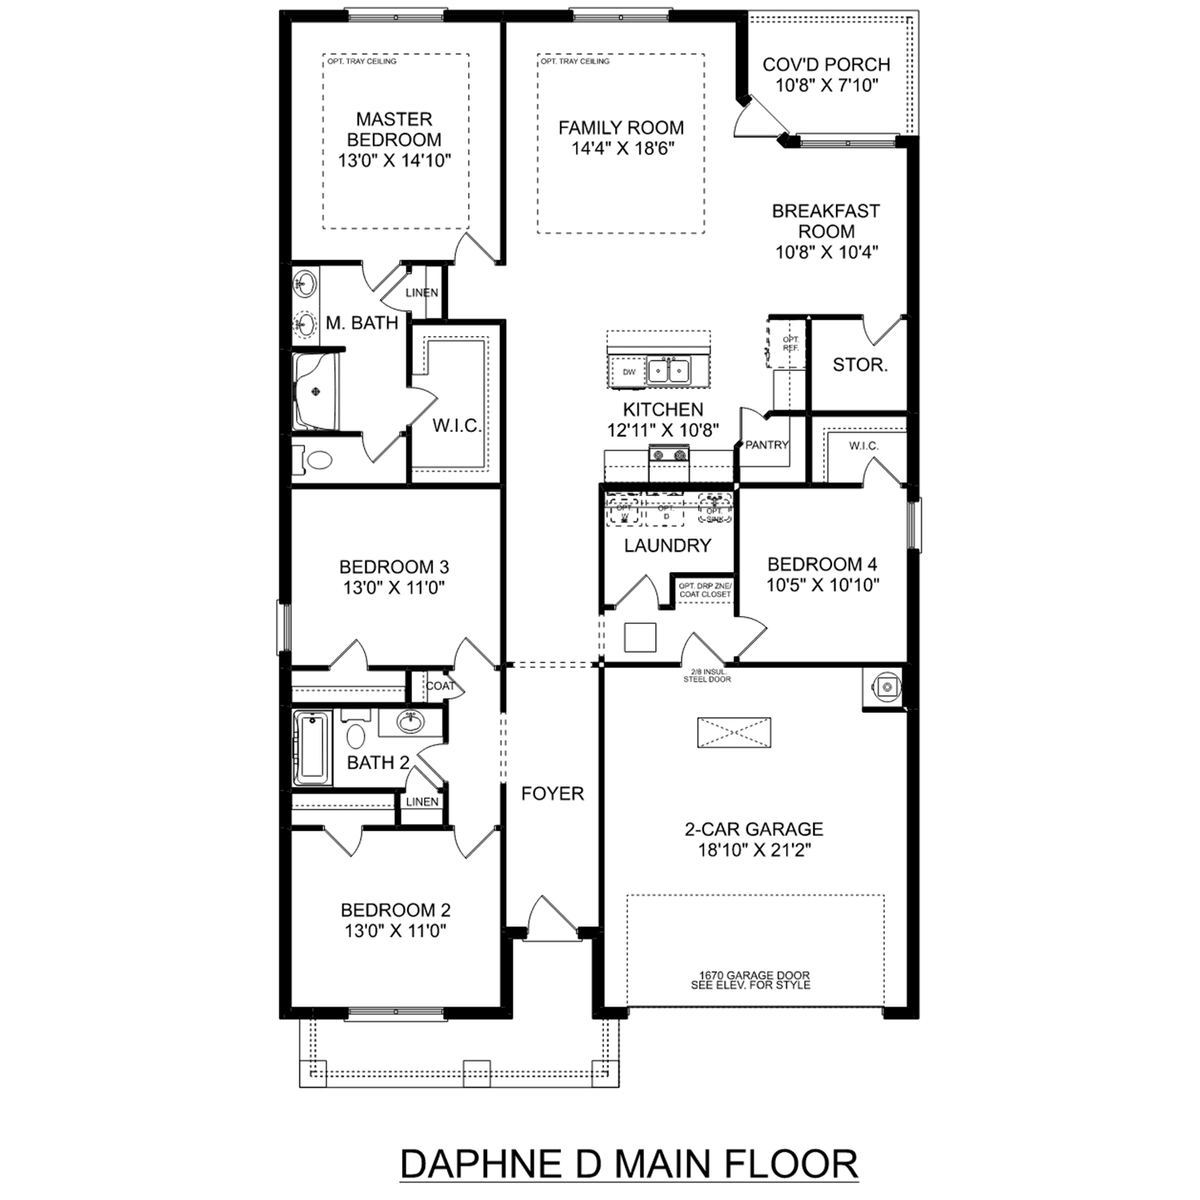 1 - The Daphne D floor plan layout for 120 Silkwood Court in Davidson Homes' Williams Pointe community.